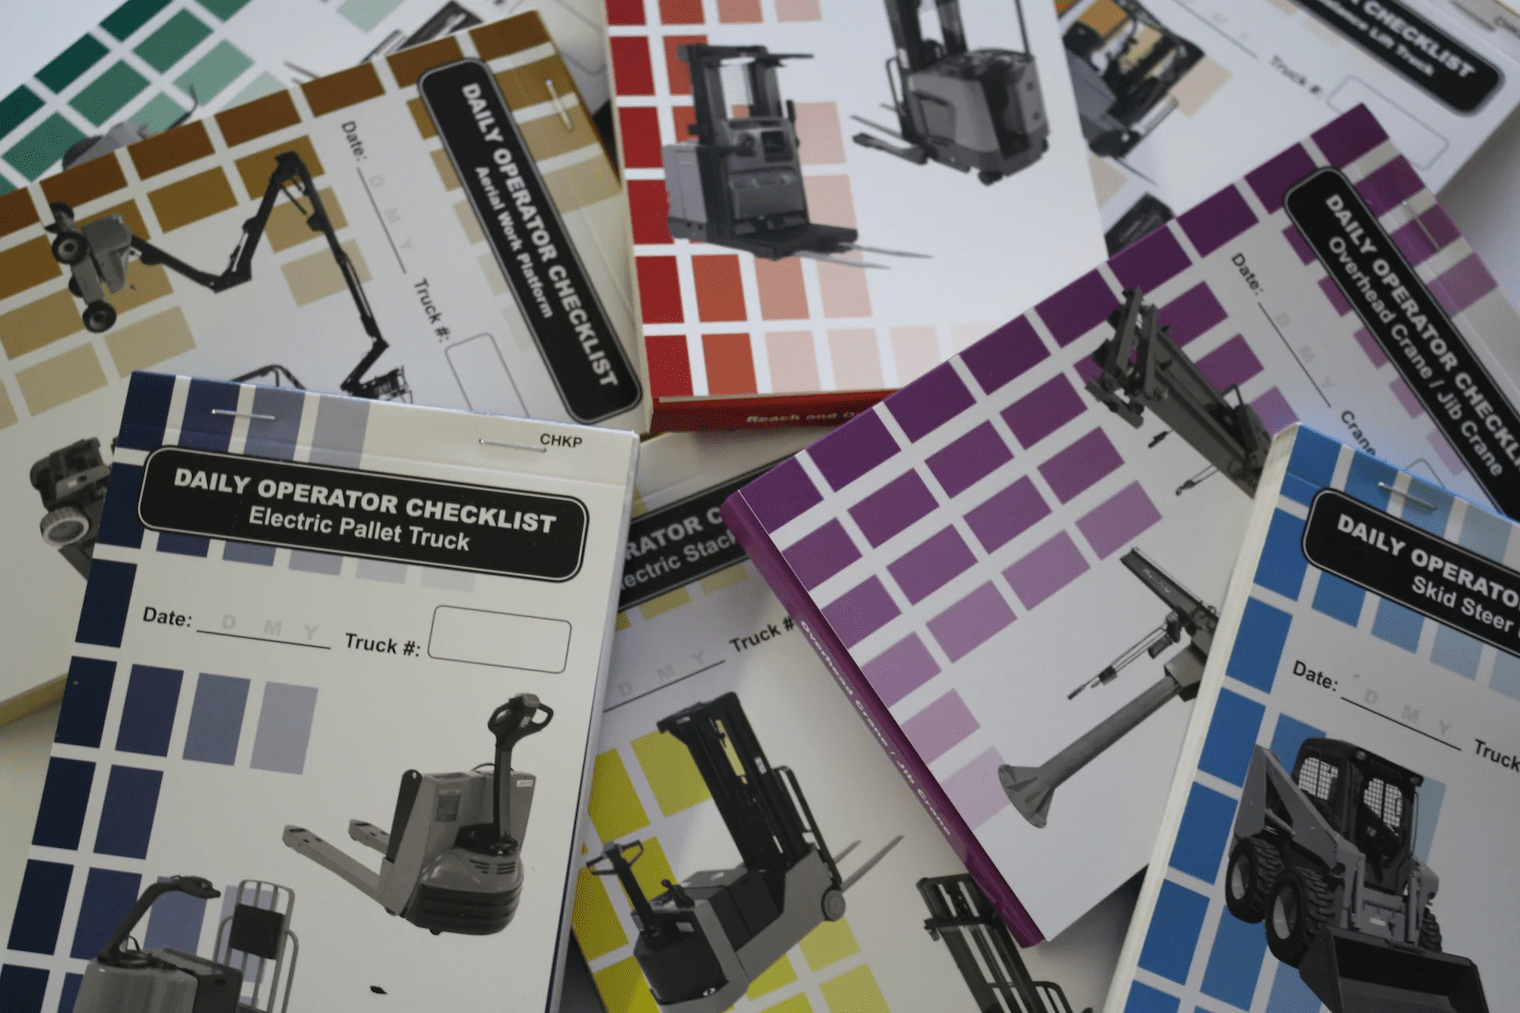 fork lift books with different color patterns